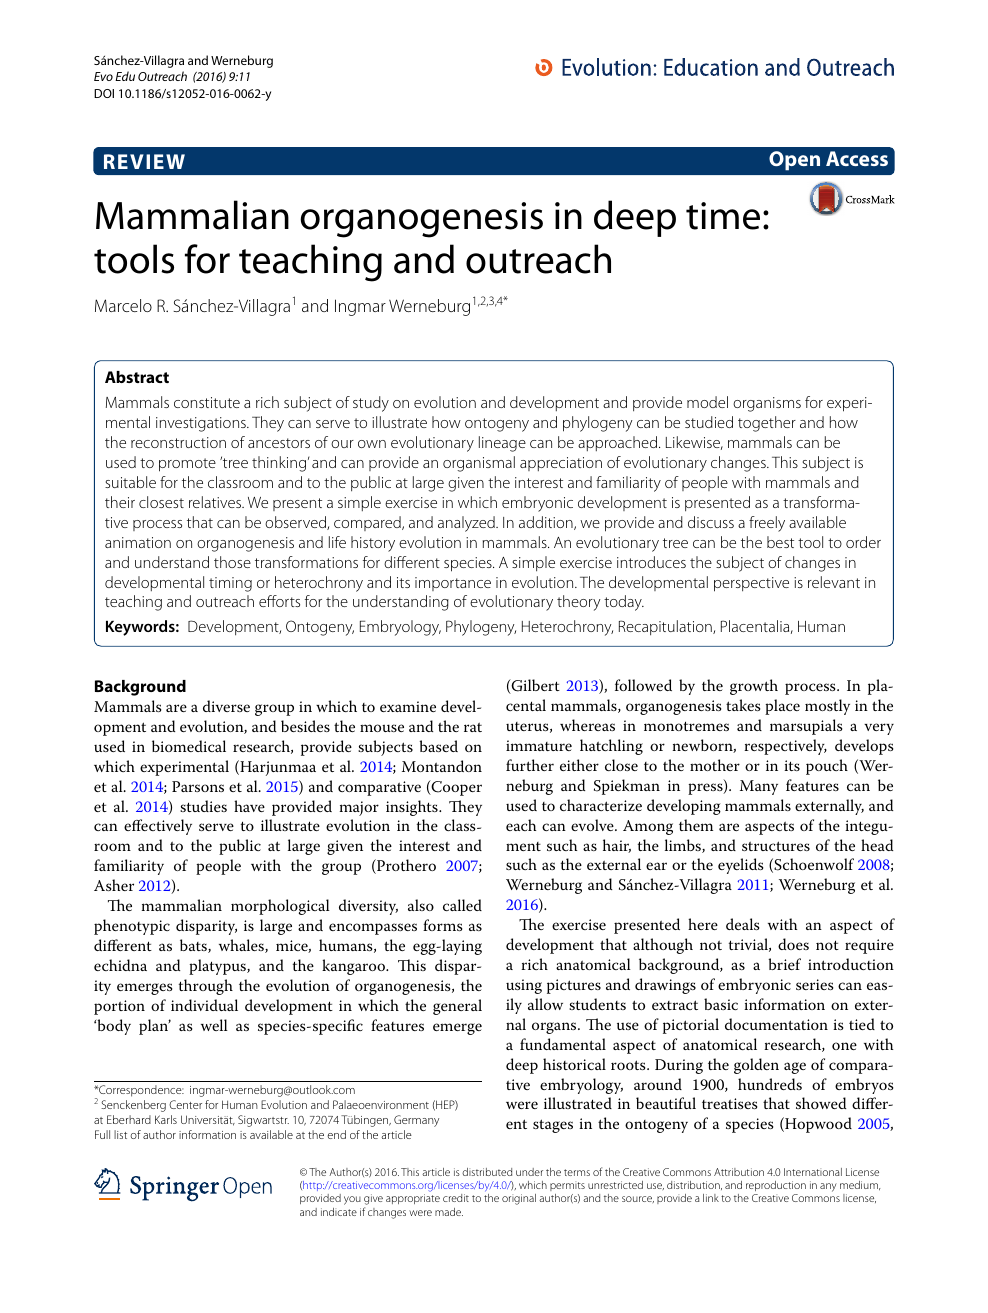 Mammalian Organogenesis In Deep Time Tools For Teaching And Outreach Topic Of Research Paper In Biological Sciences Download Scholarly Article Pdf And Read For Free On Cyberleninka Open Science Hub